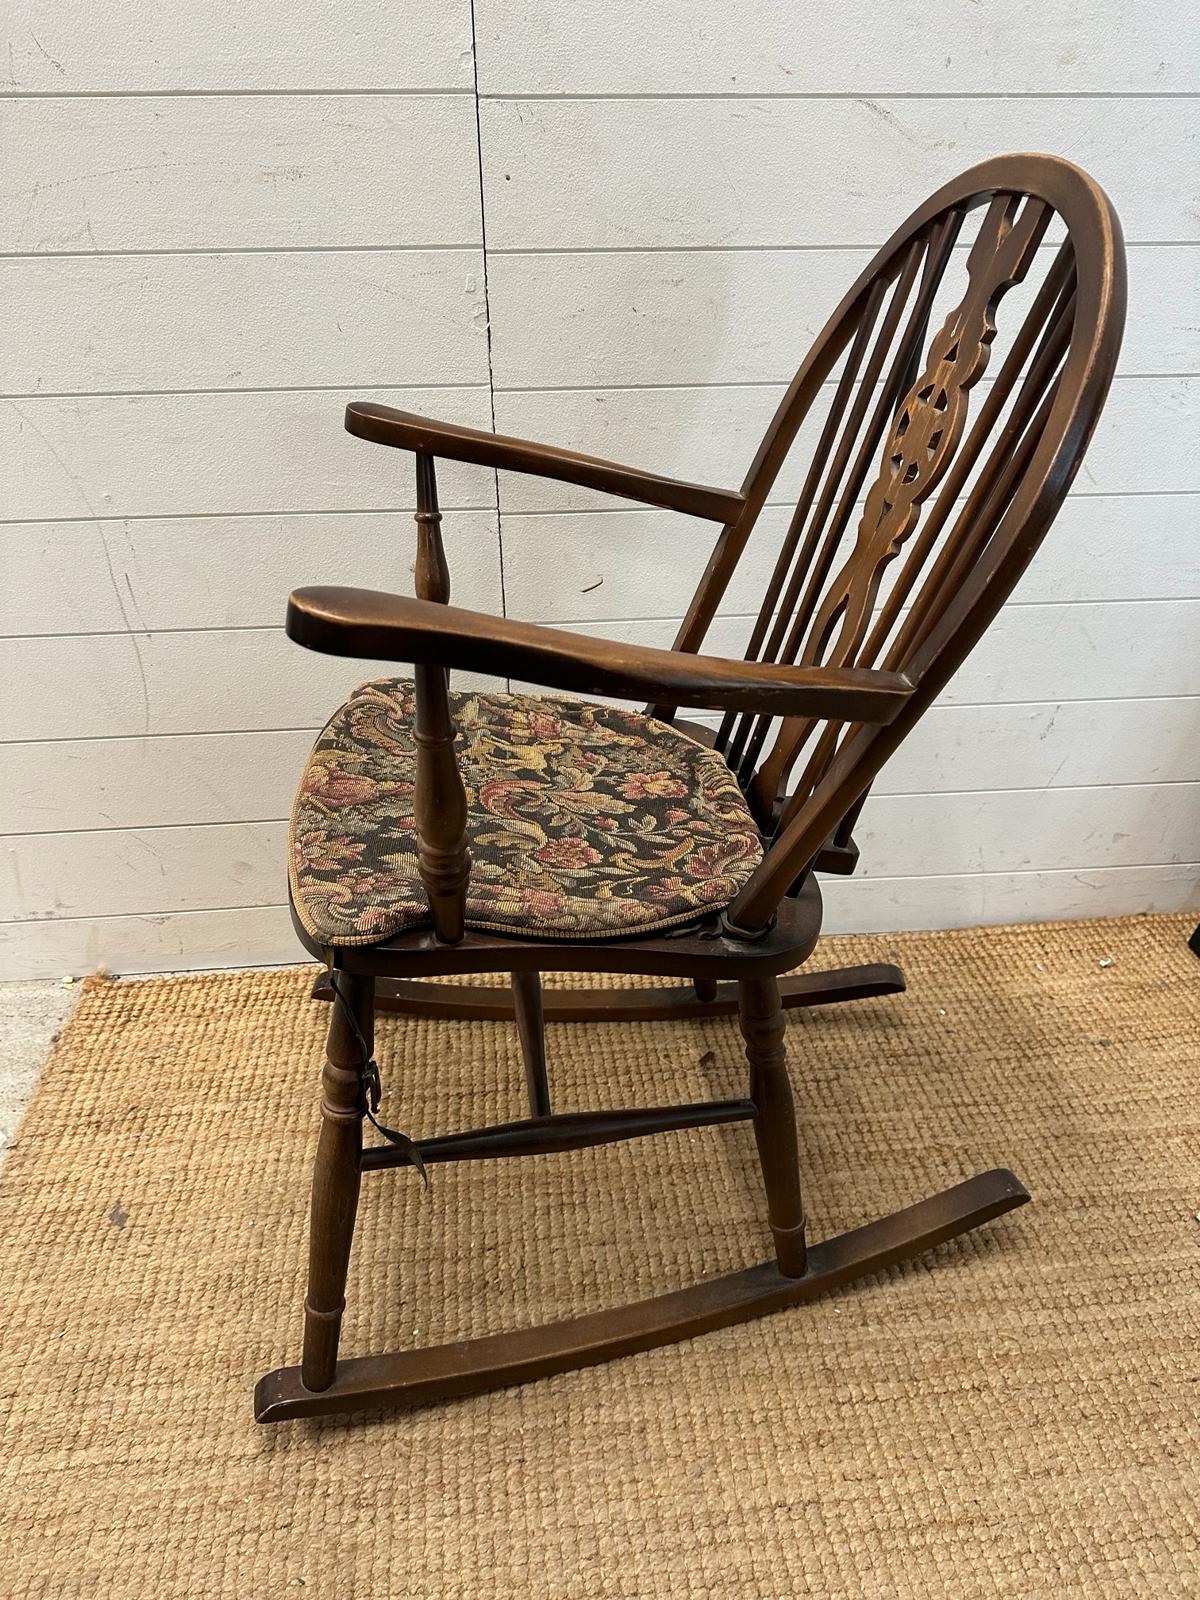 A Mid Century wheel back rocking chair - Image 2 of 4